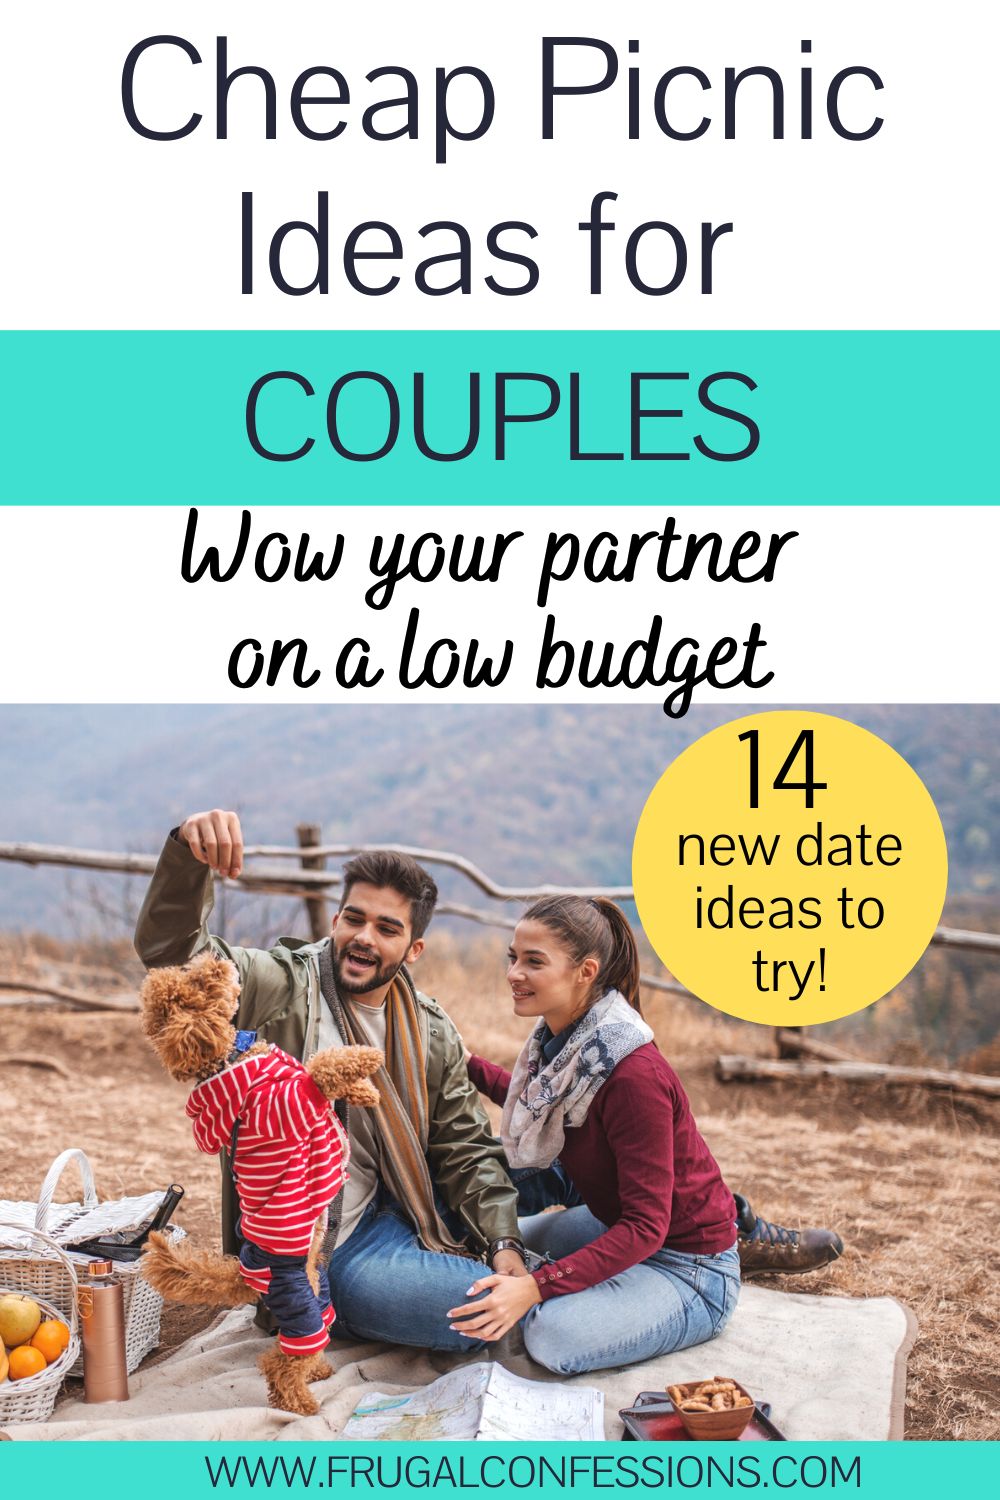 couple with their dog on a picnic, text overlay" cheap picnic ideas for couples"